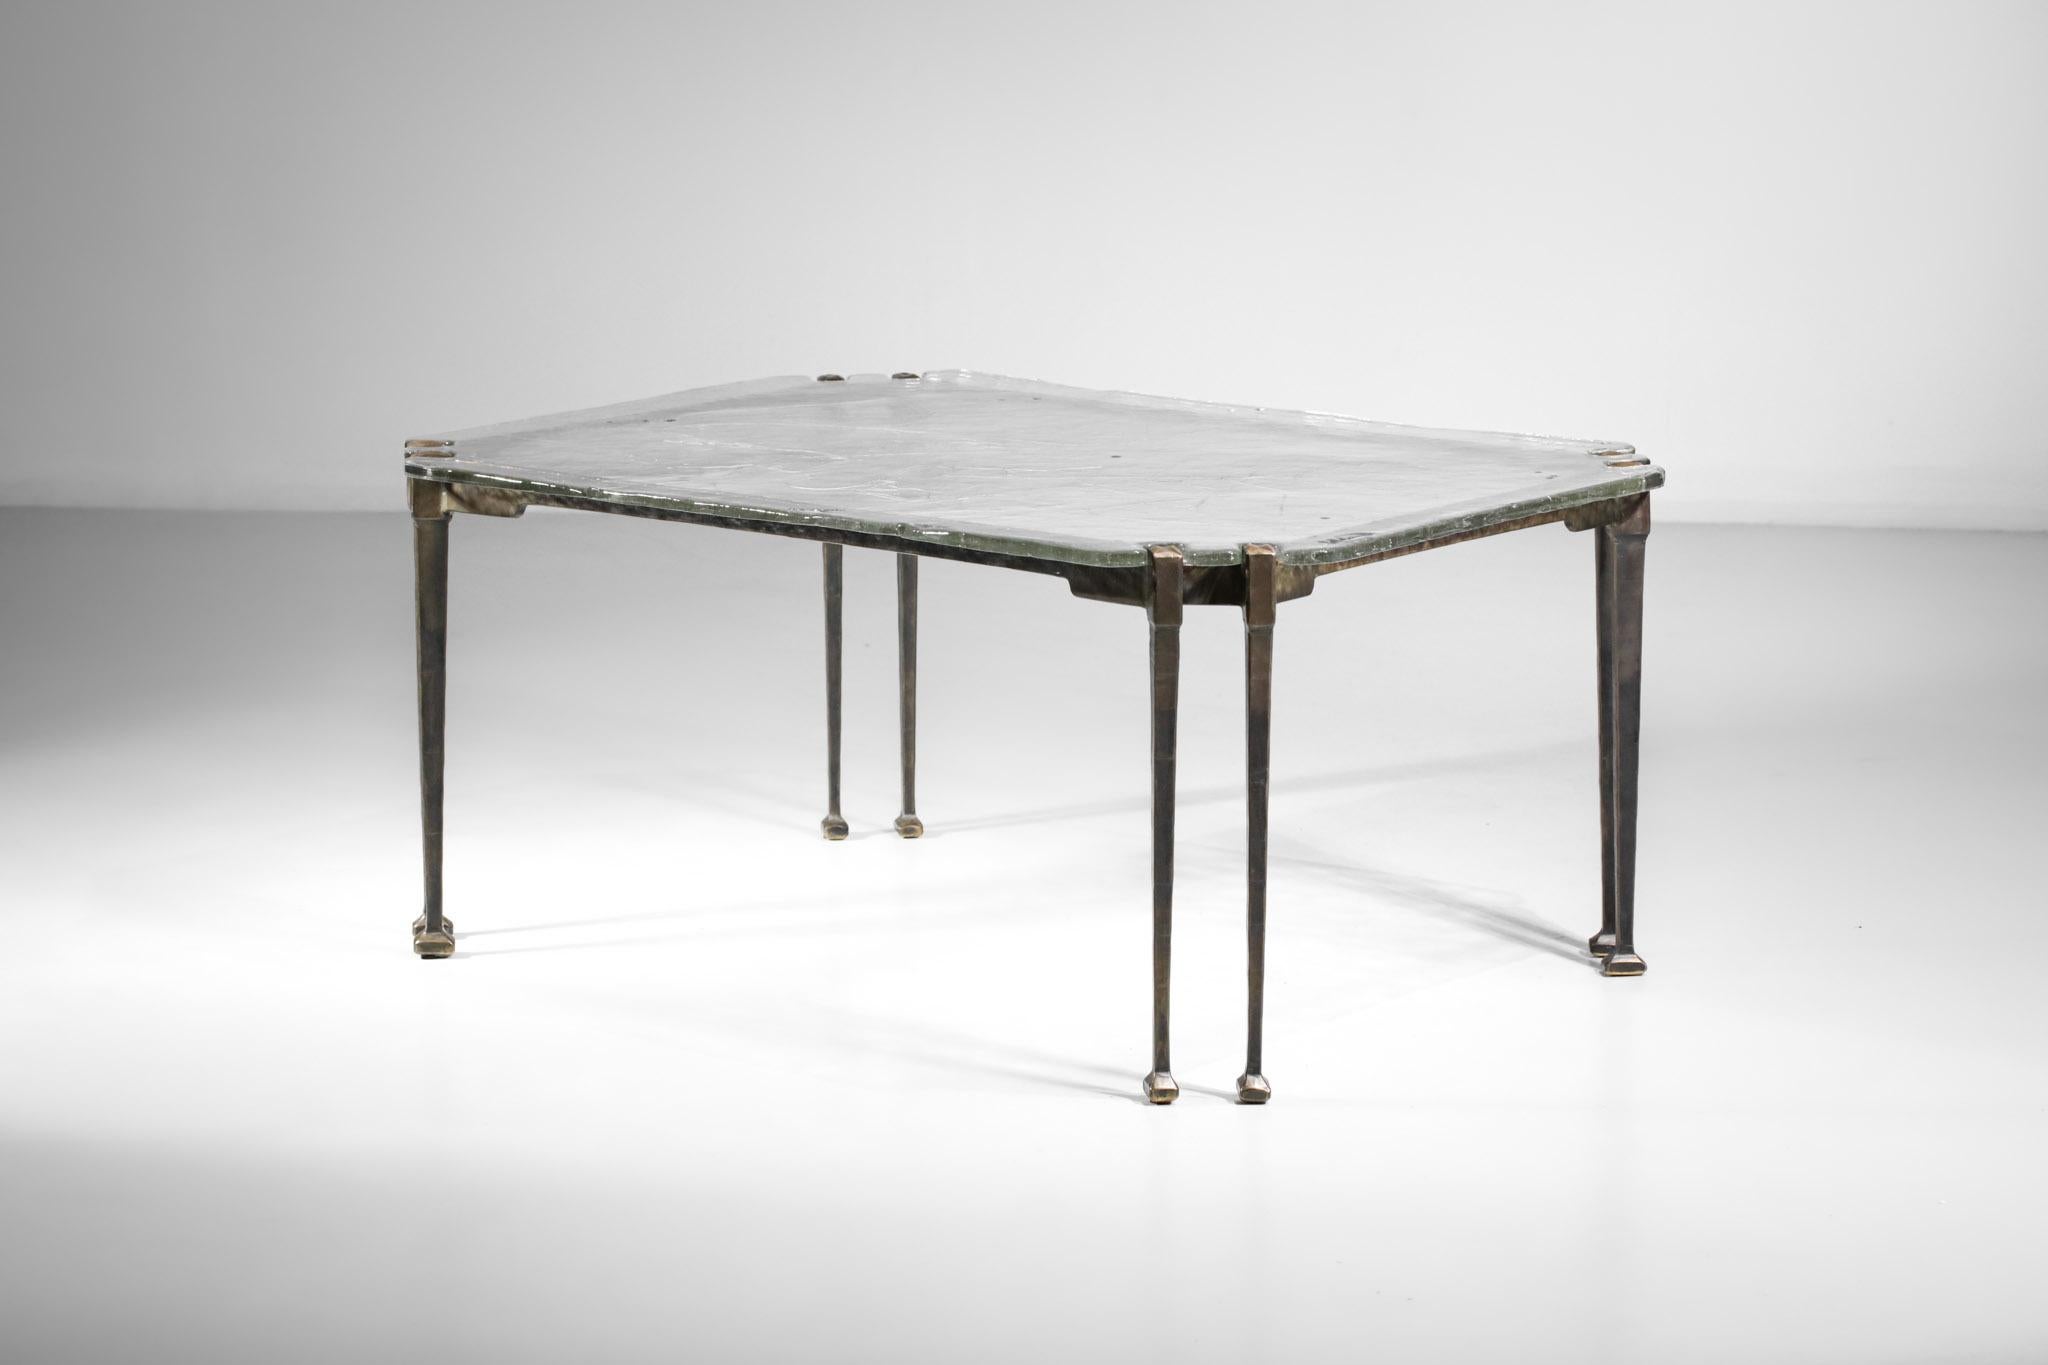 Modern Rare Lothar Klute Coffee Table with 8 Legs in Bronze and Glass German Design